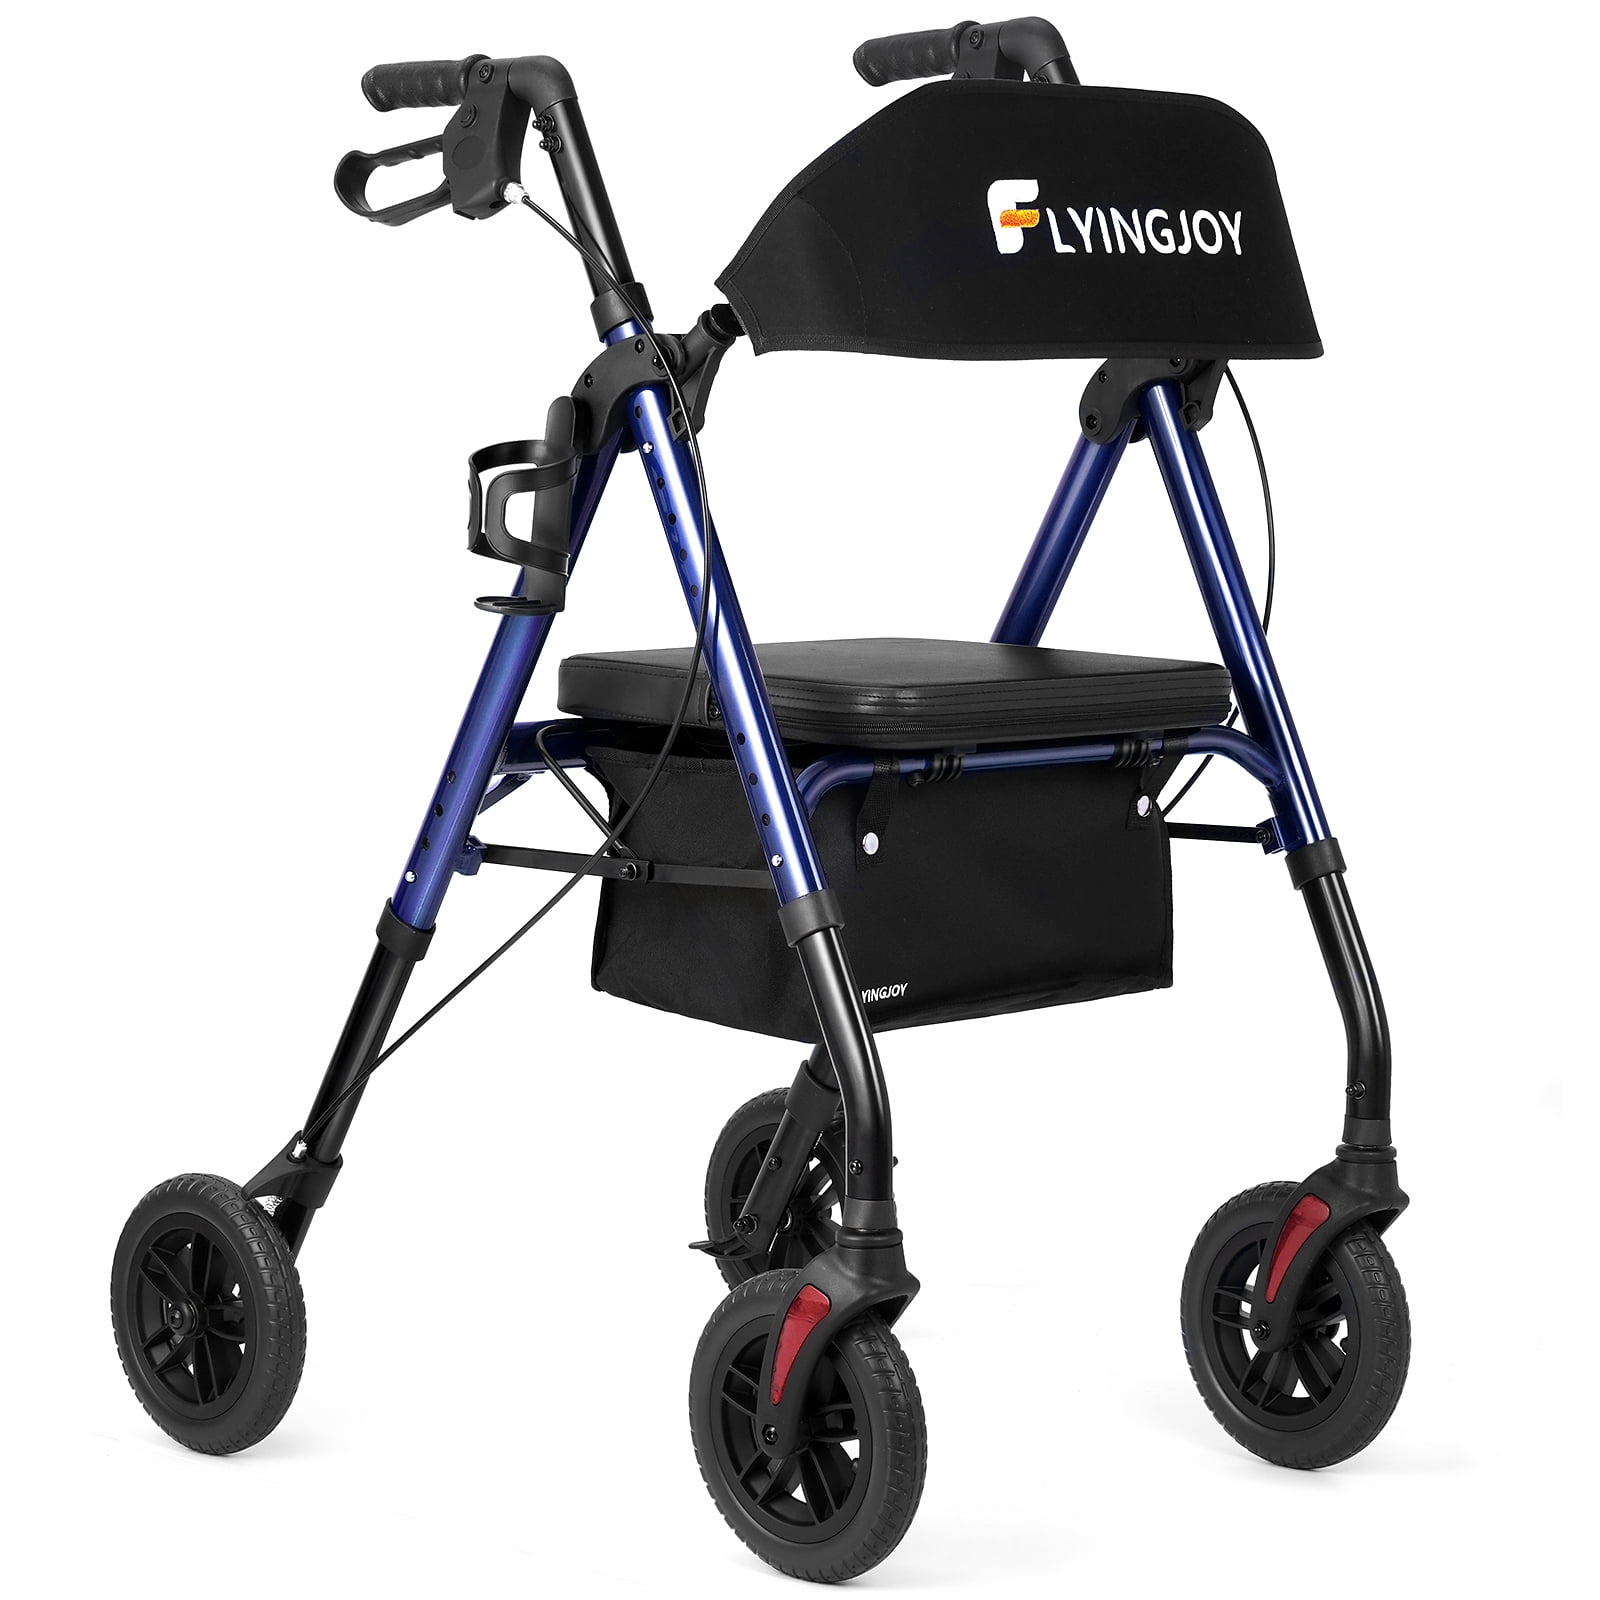 Rollator Walkers Rollator Walker with Seat Cushion, Folding Rolling  Walkers, Adjustable Handle Height, Durable Lightweight Frame,Supports Up to  220